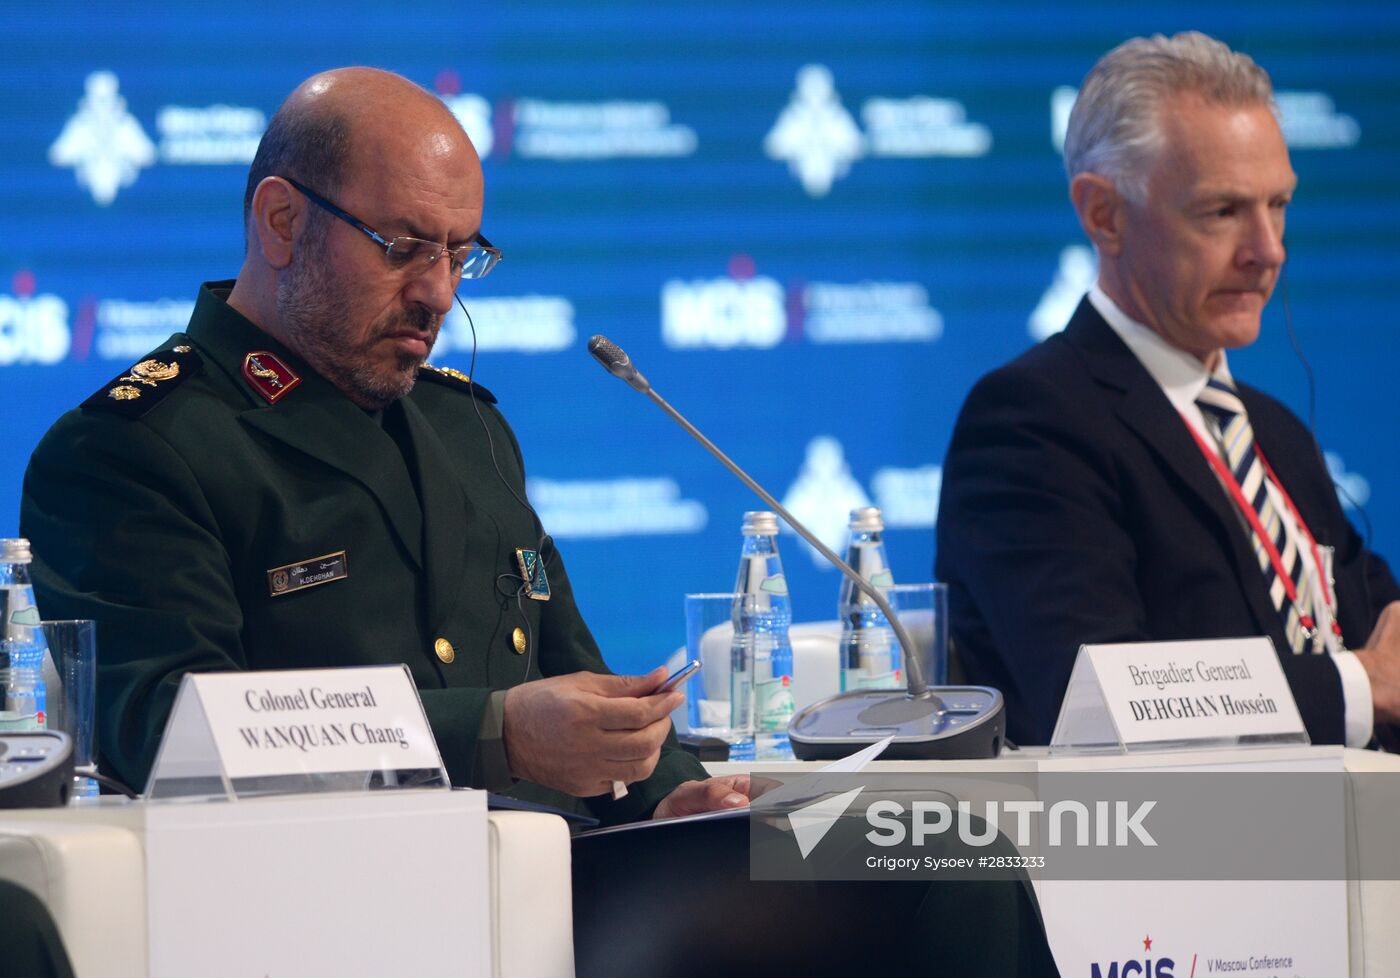 Fifth Moscow Conference on International Security